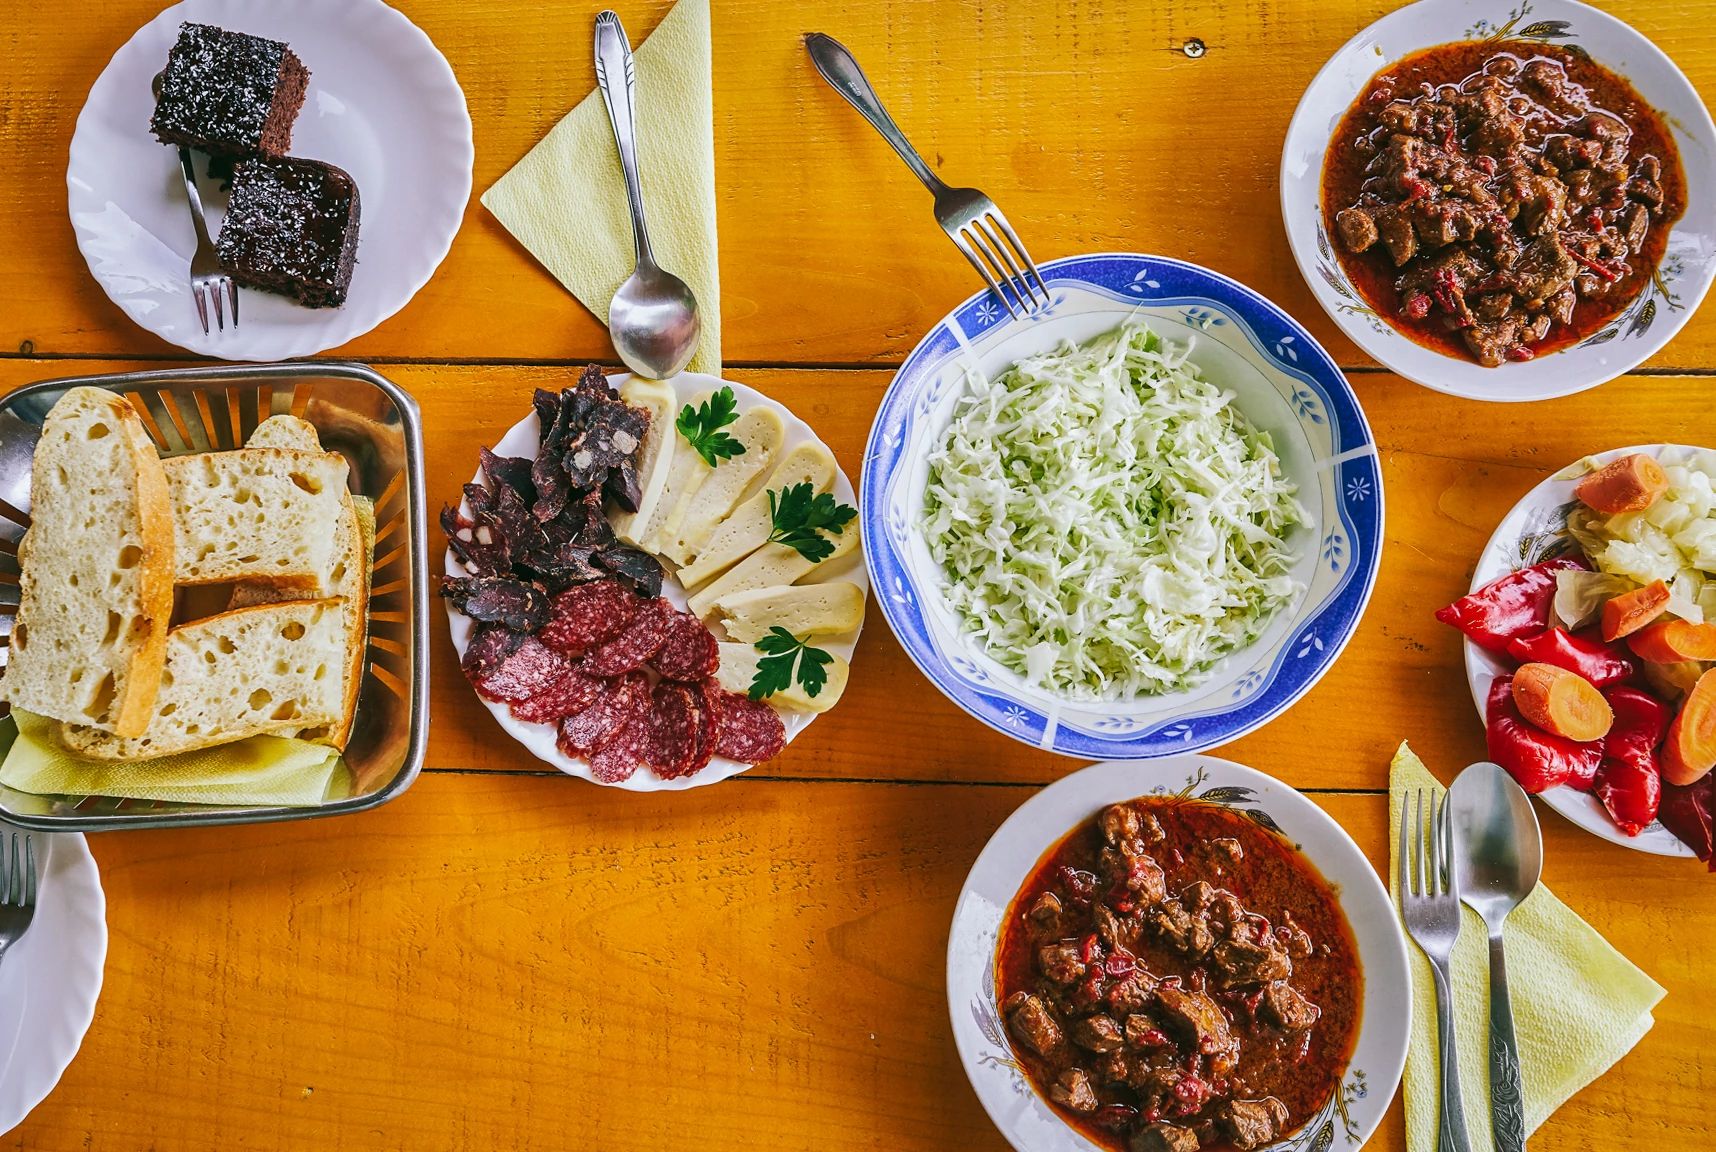 Overhead shot of several food dishes on a table.